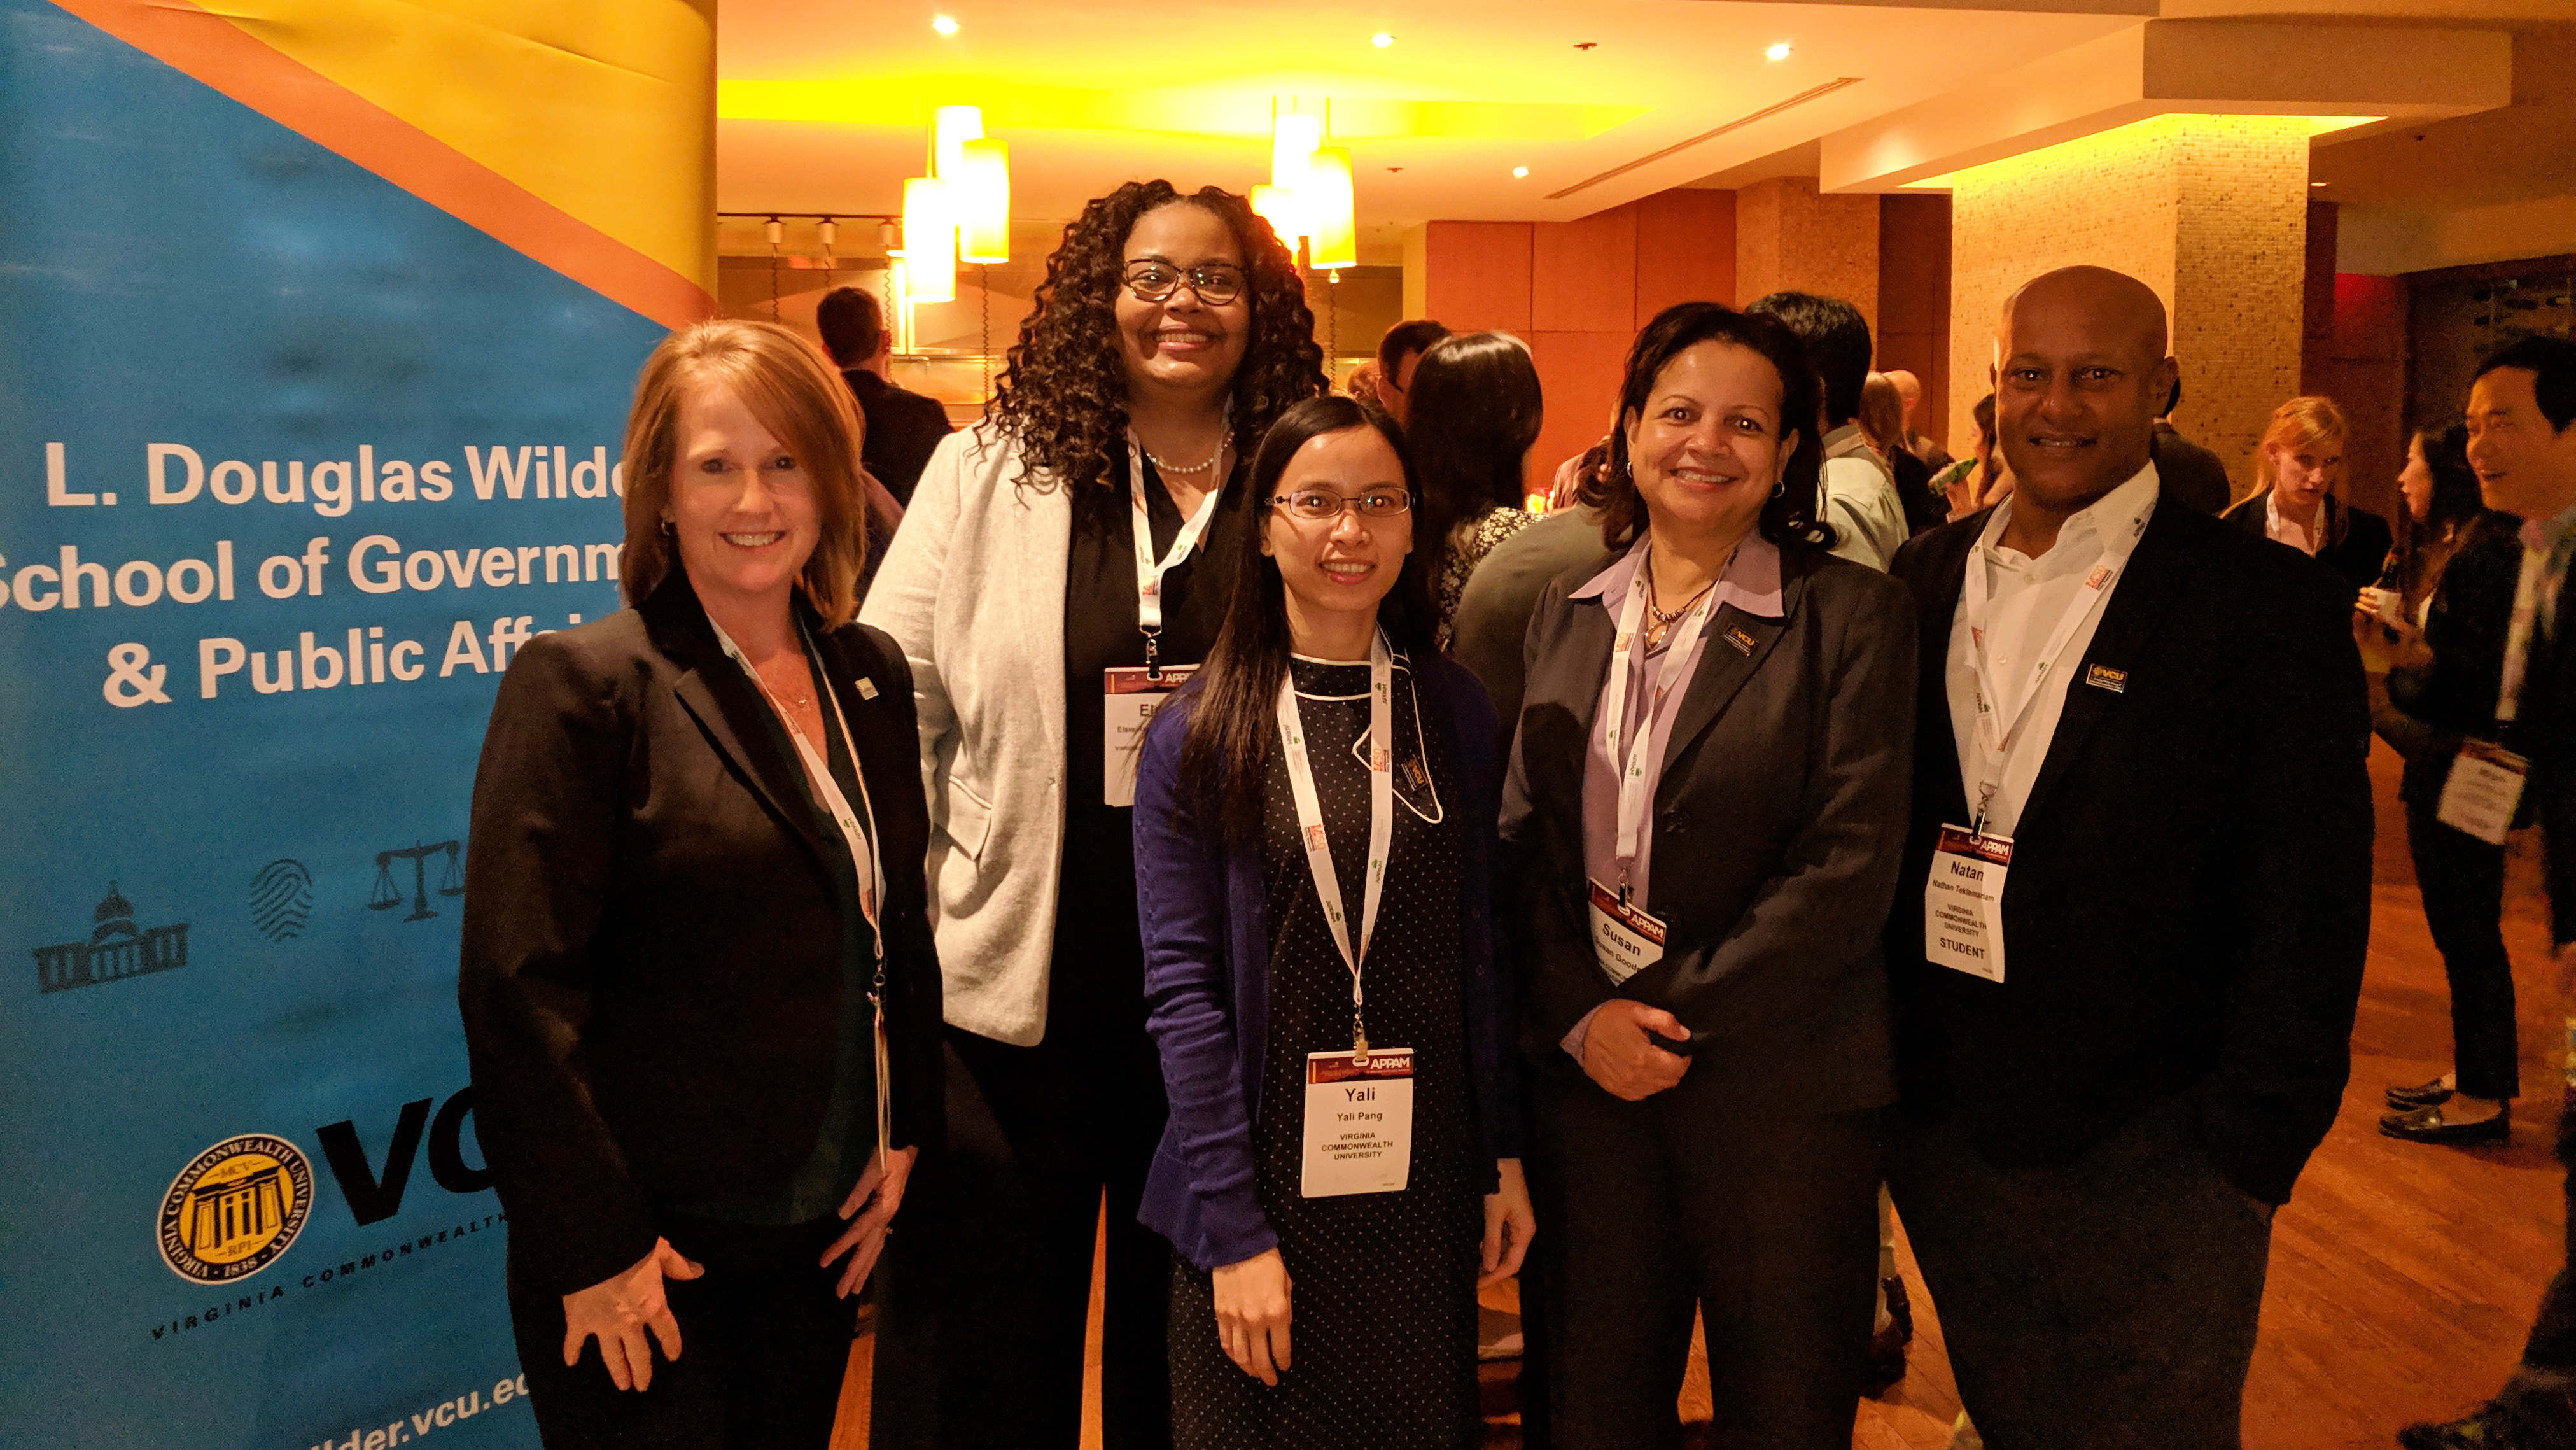 Wilder School delegation members at the APPAM Student Mixer on Nov. 9. From left to right: Jill Gordon, Ph.D., Elsie Harper-Anderson, Ph.D., Yali Pang, Susan Gooden, Ph.D., and Nathan Teklemariam. 